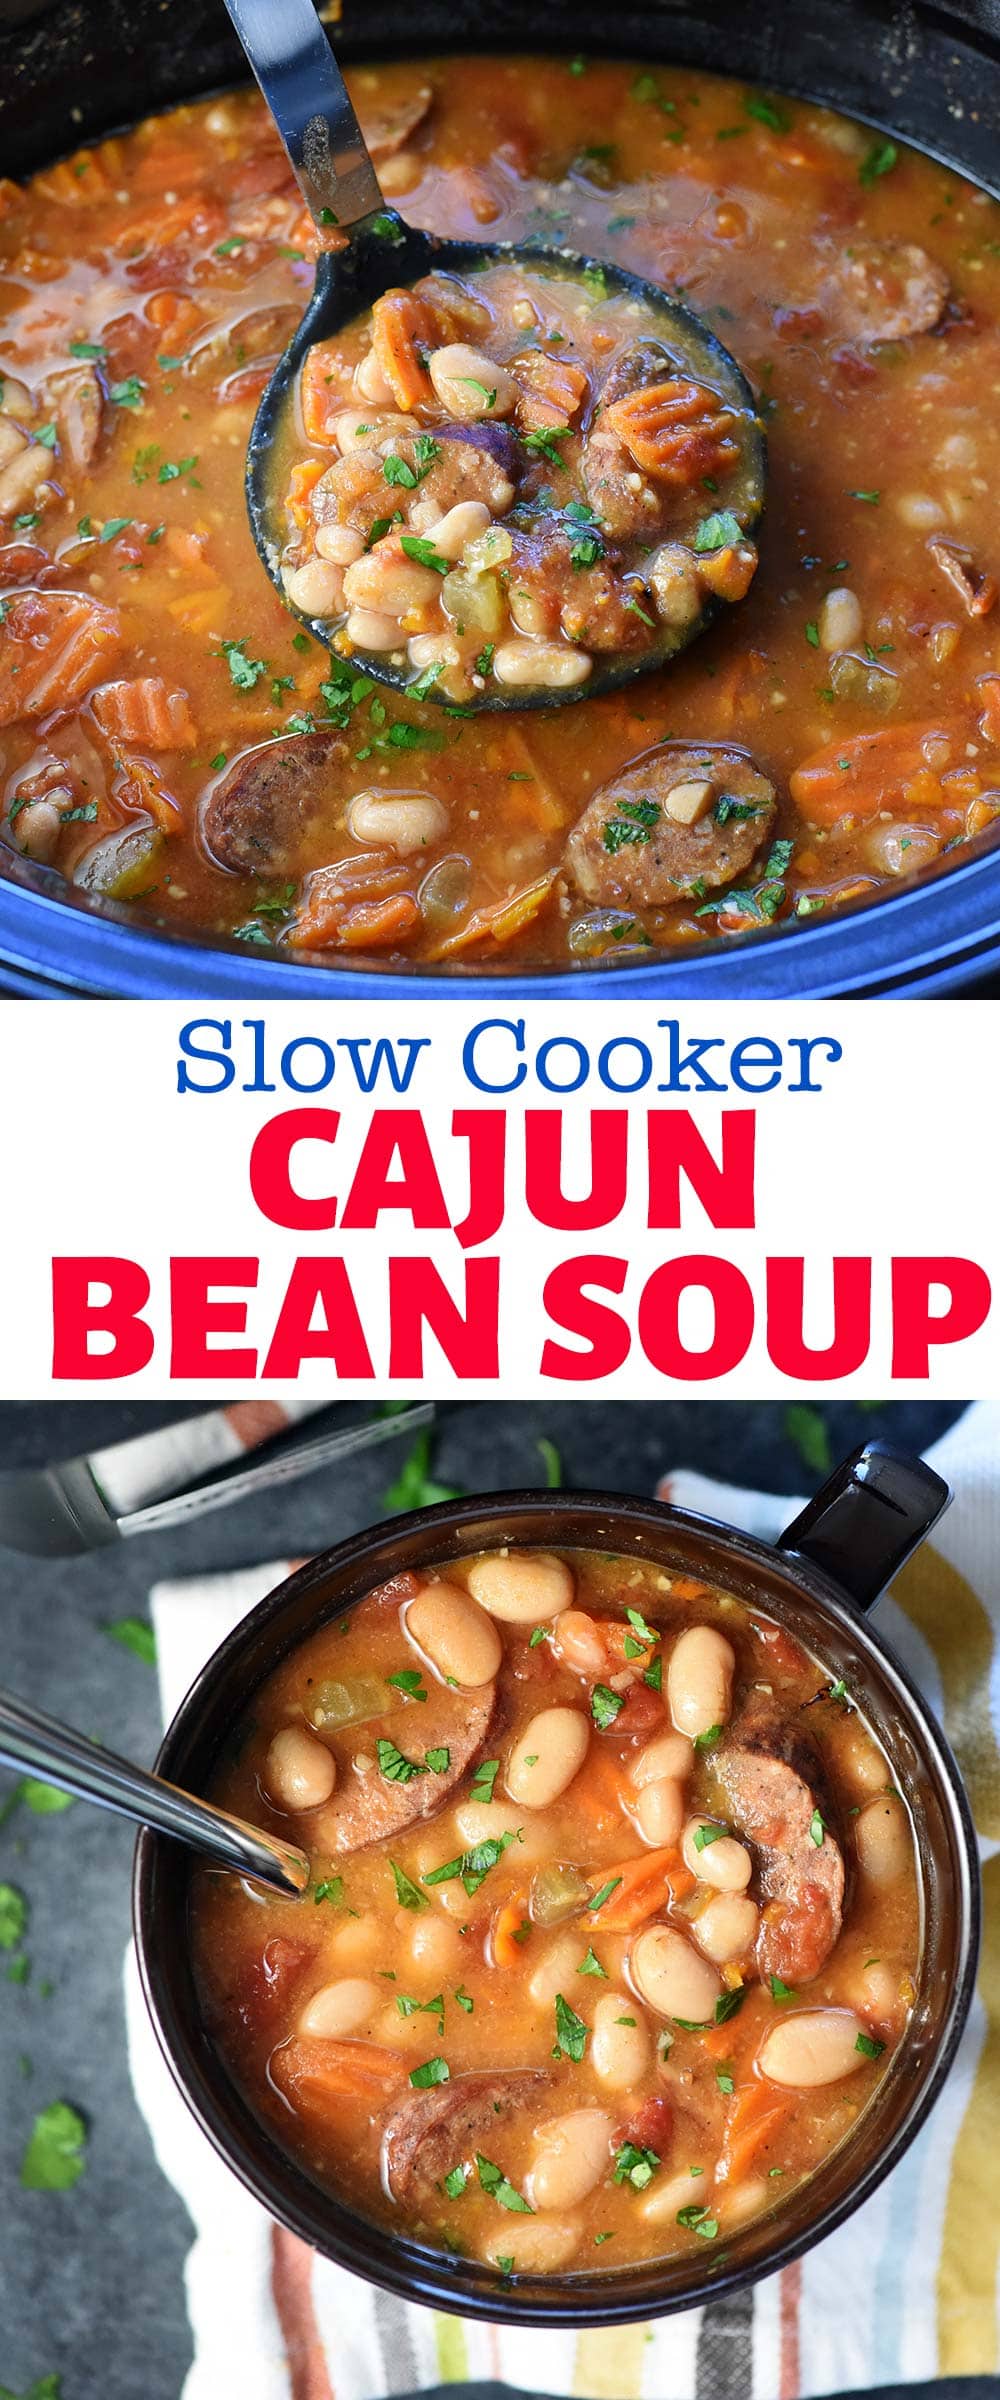 Cajun Bean Soup ~ a cozy slow cooker recipe loaded with white beans, andouille sausage, veggies, and a flavorful broth to warm you up! | FiveHeartHome.com via @fivehearthome